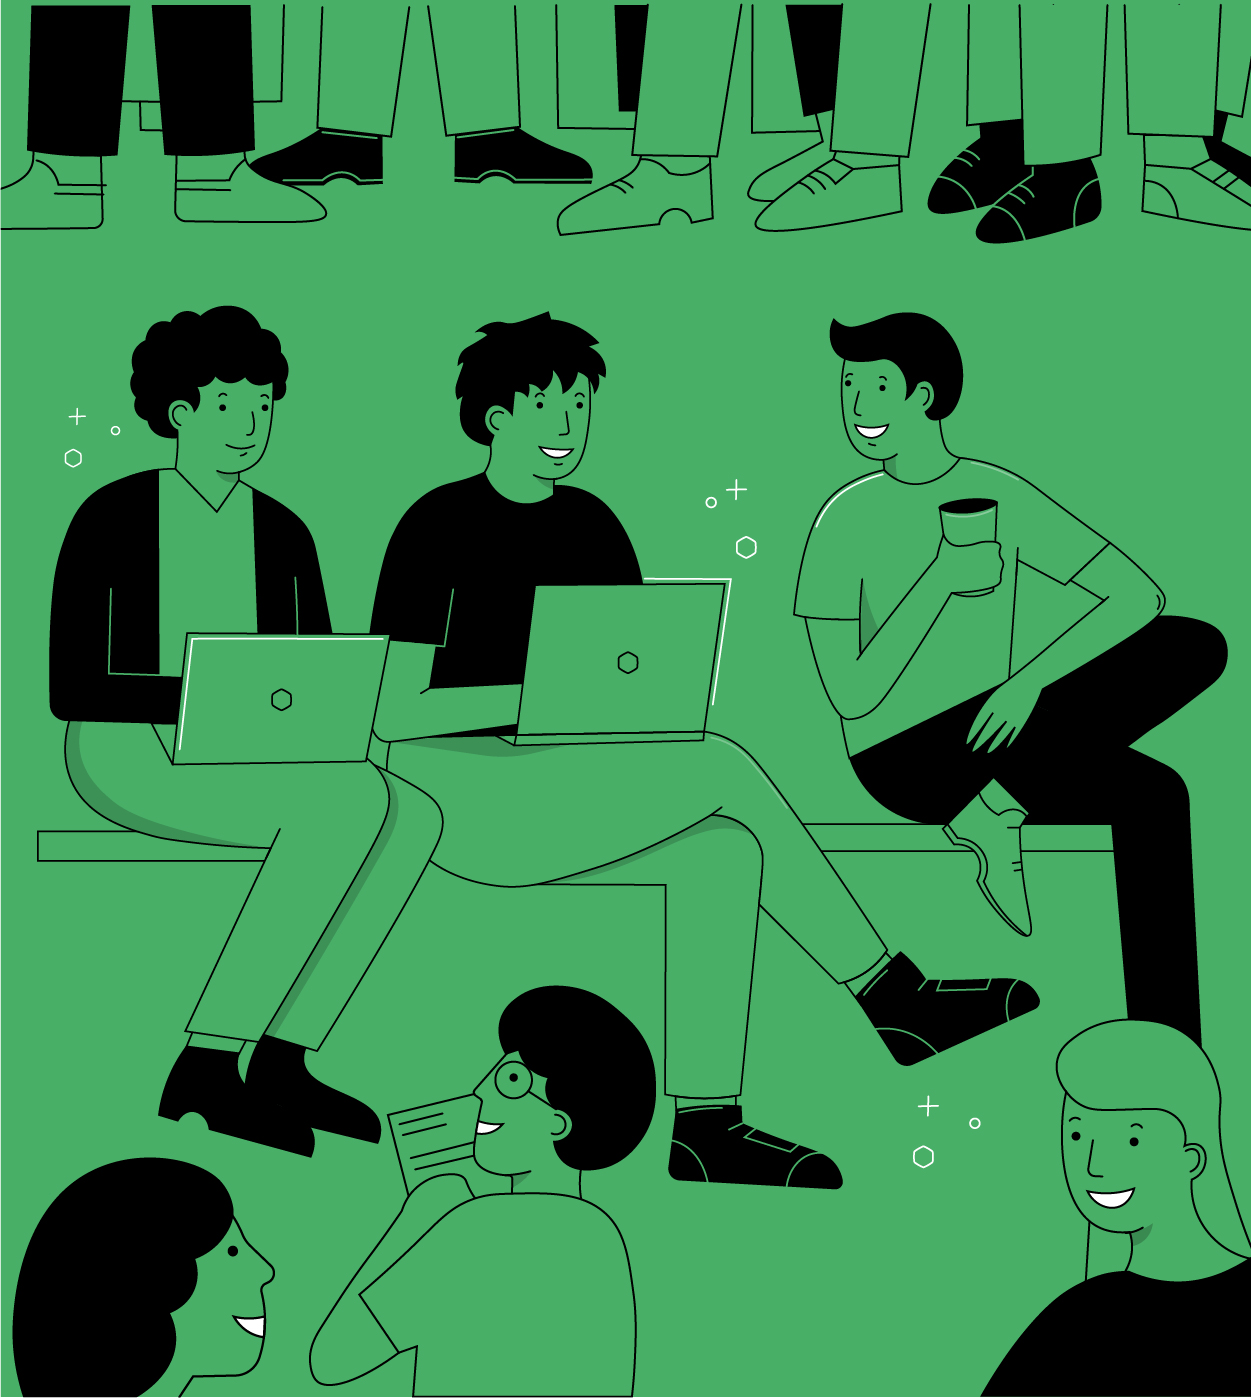 Illustration of three people on a bench out of which two are working on their laptops, with a bunch of people surrounding them